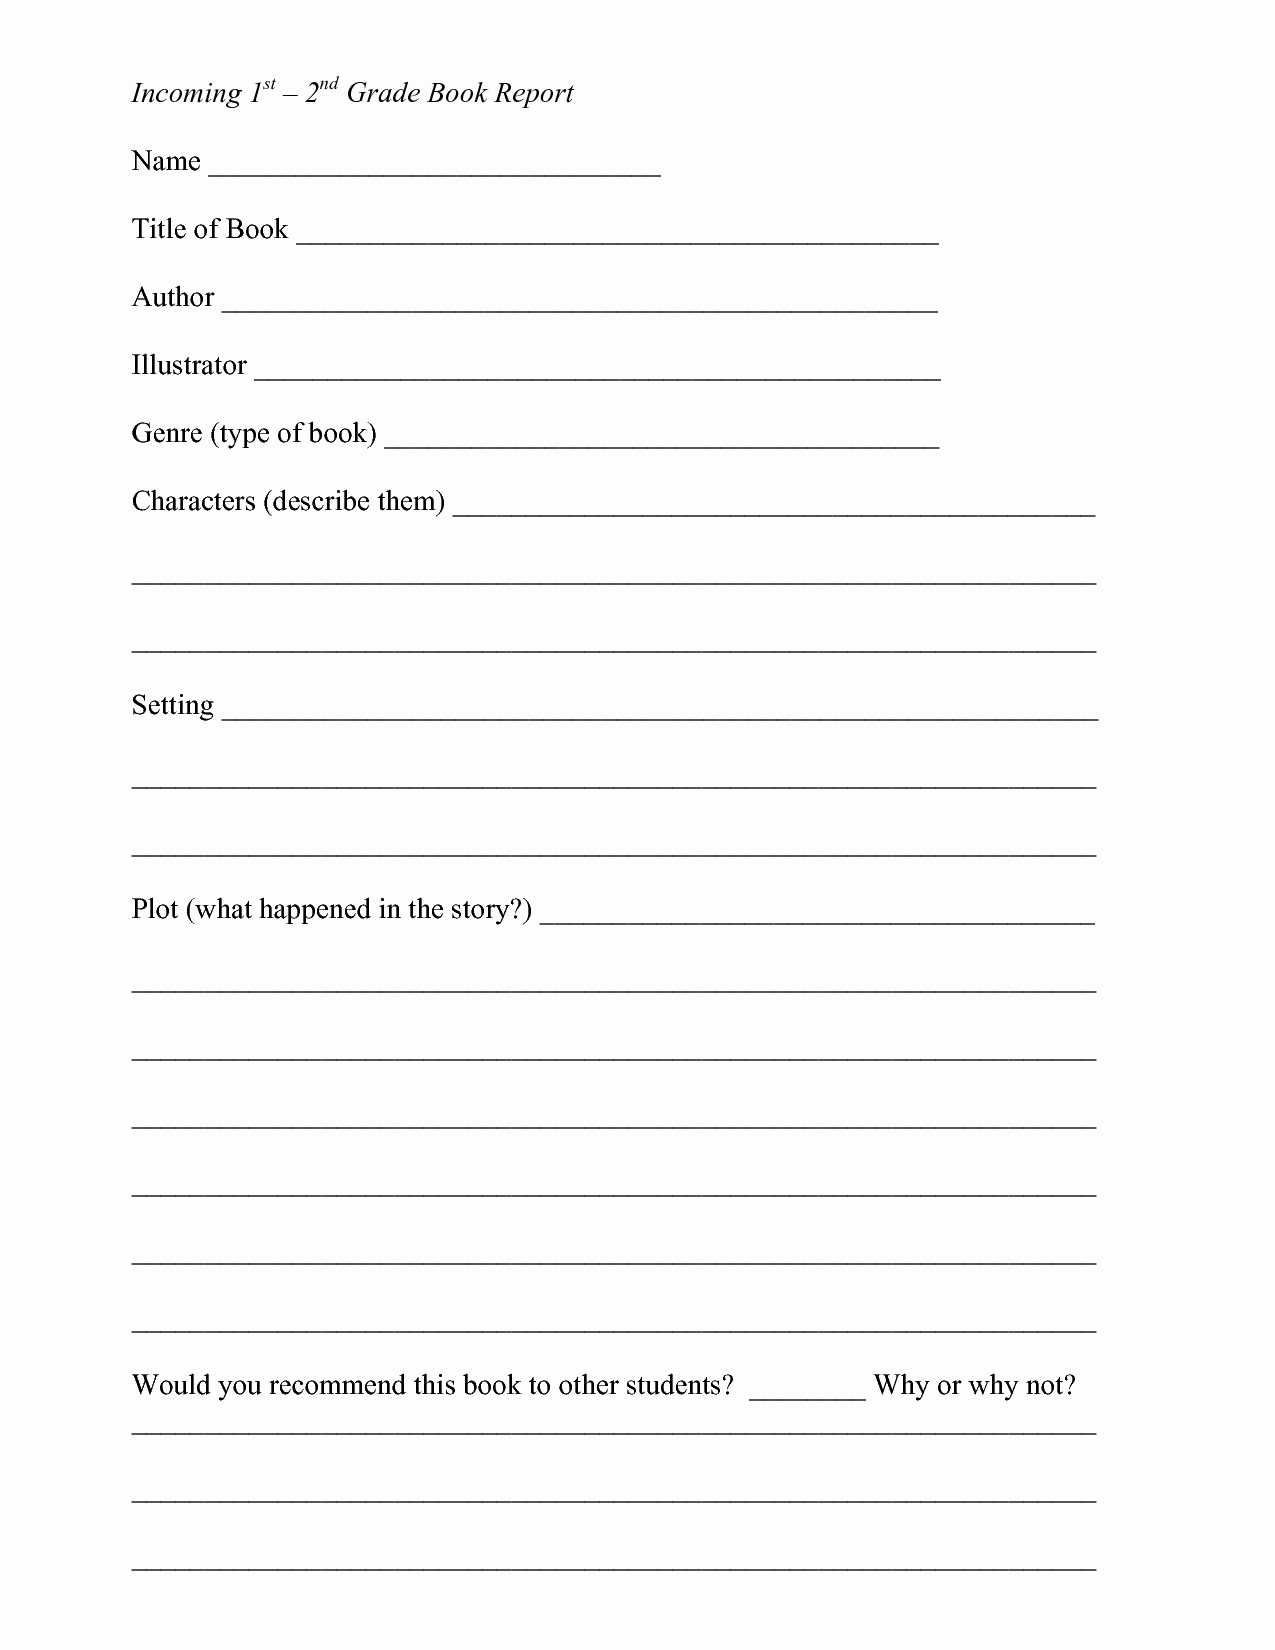 Fiction Book Report Template 6Th Grade For 7Th Graders Pdf With Regard To Second Grade Book Report Template